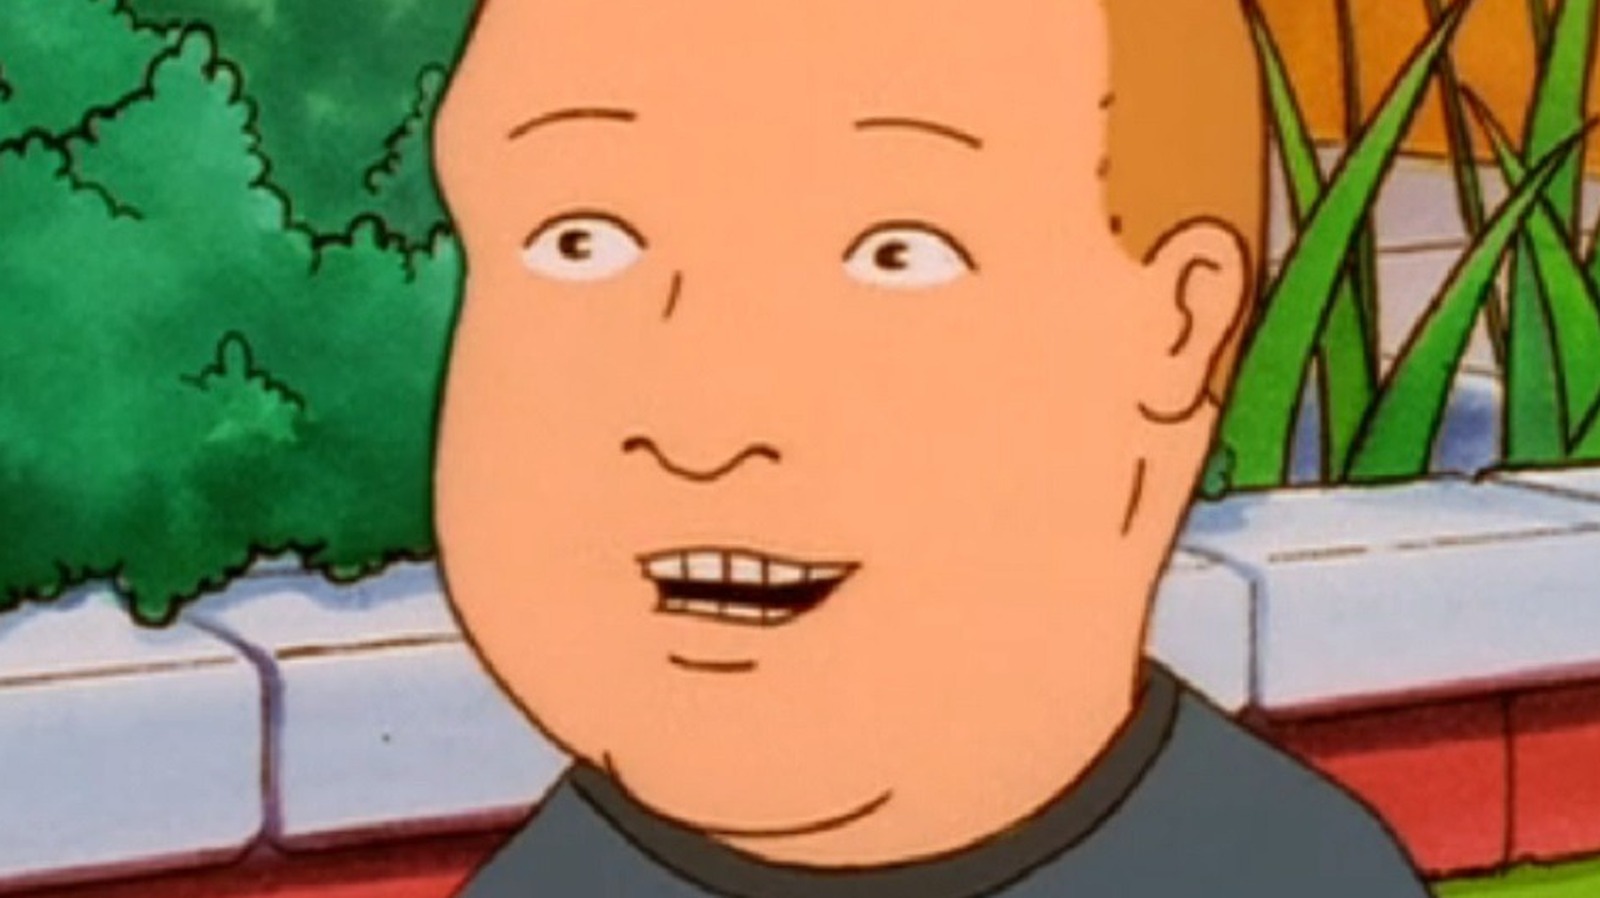 What Does Bobby Hill Have In Common With Texas Tech University?